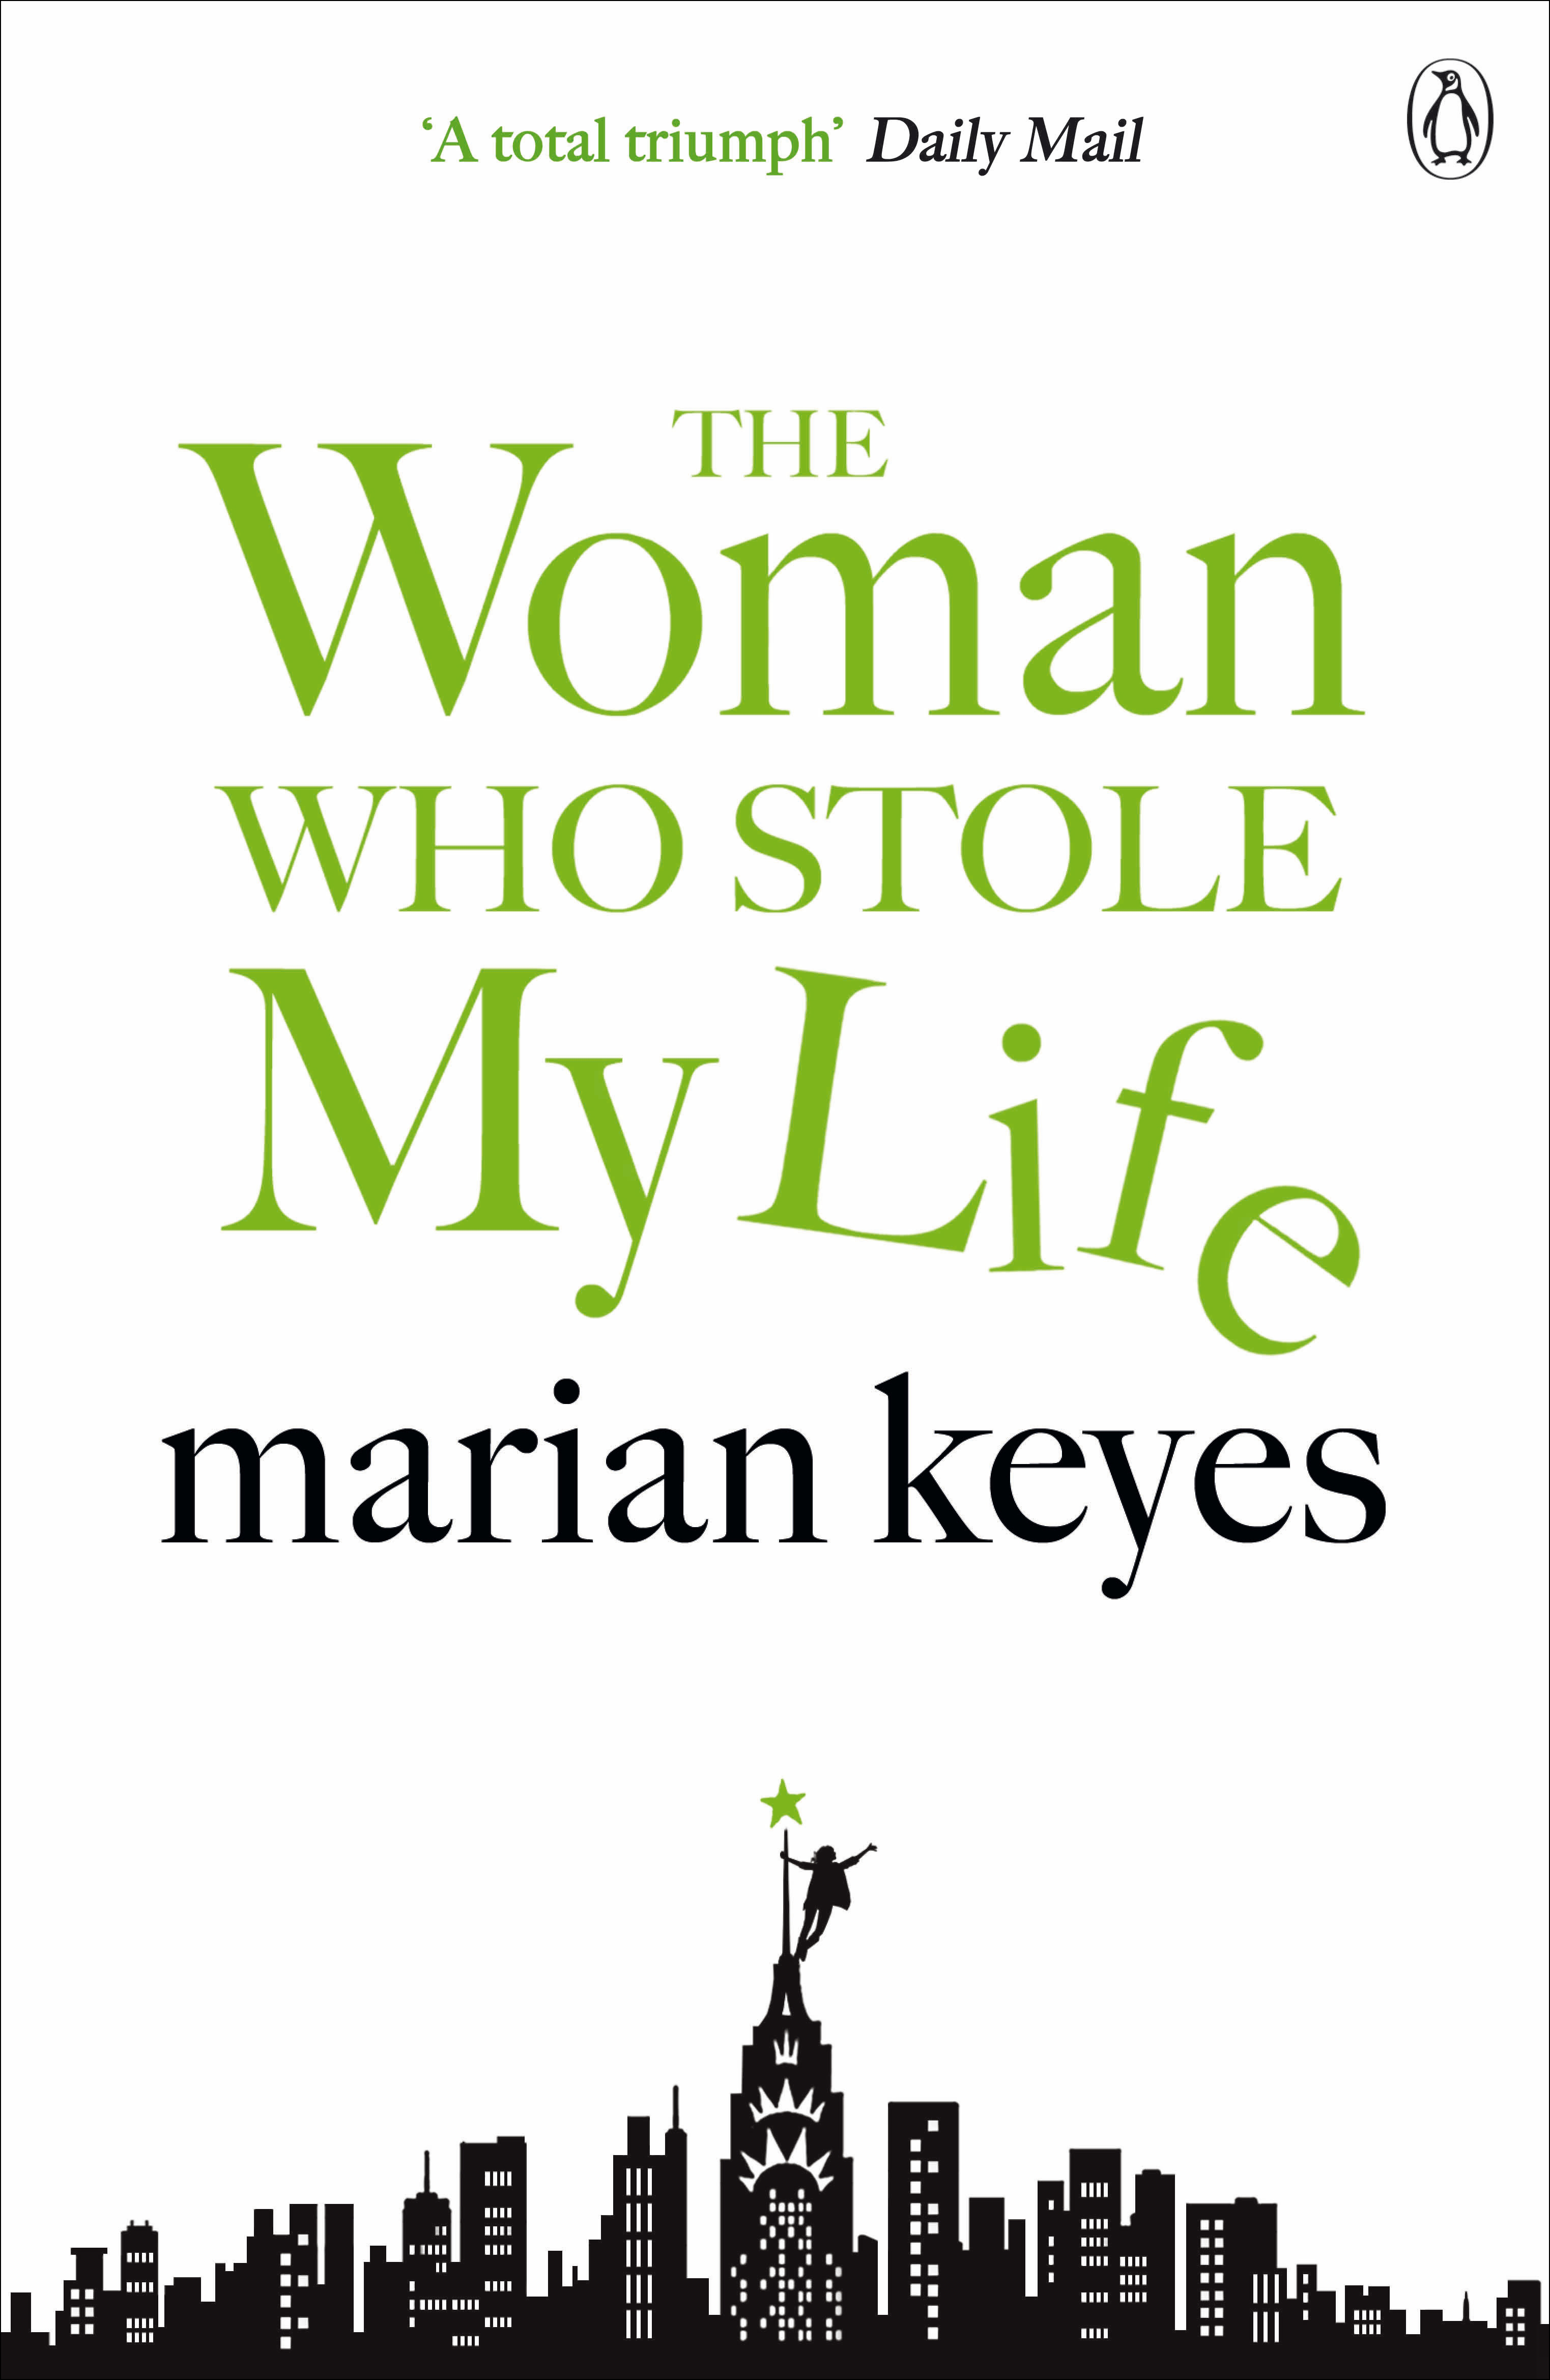 The Woman Who Stolen My Life by Marian Keyes